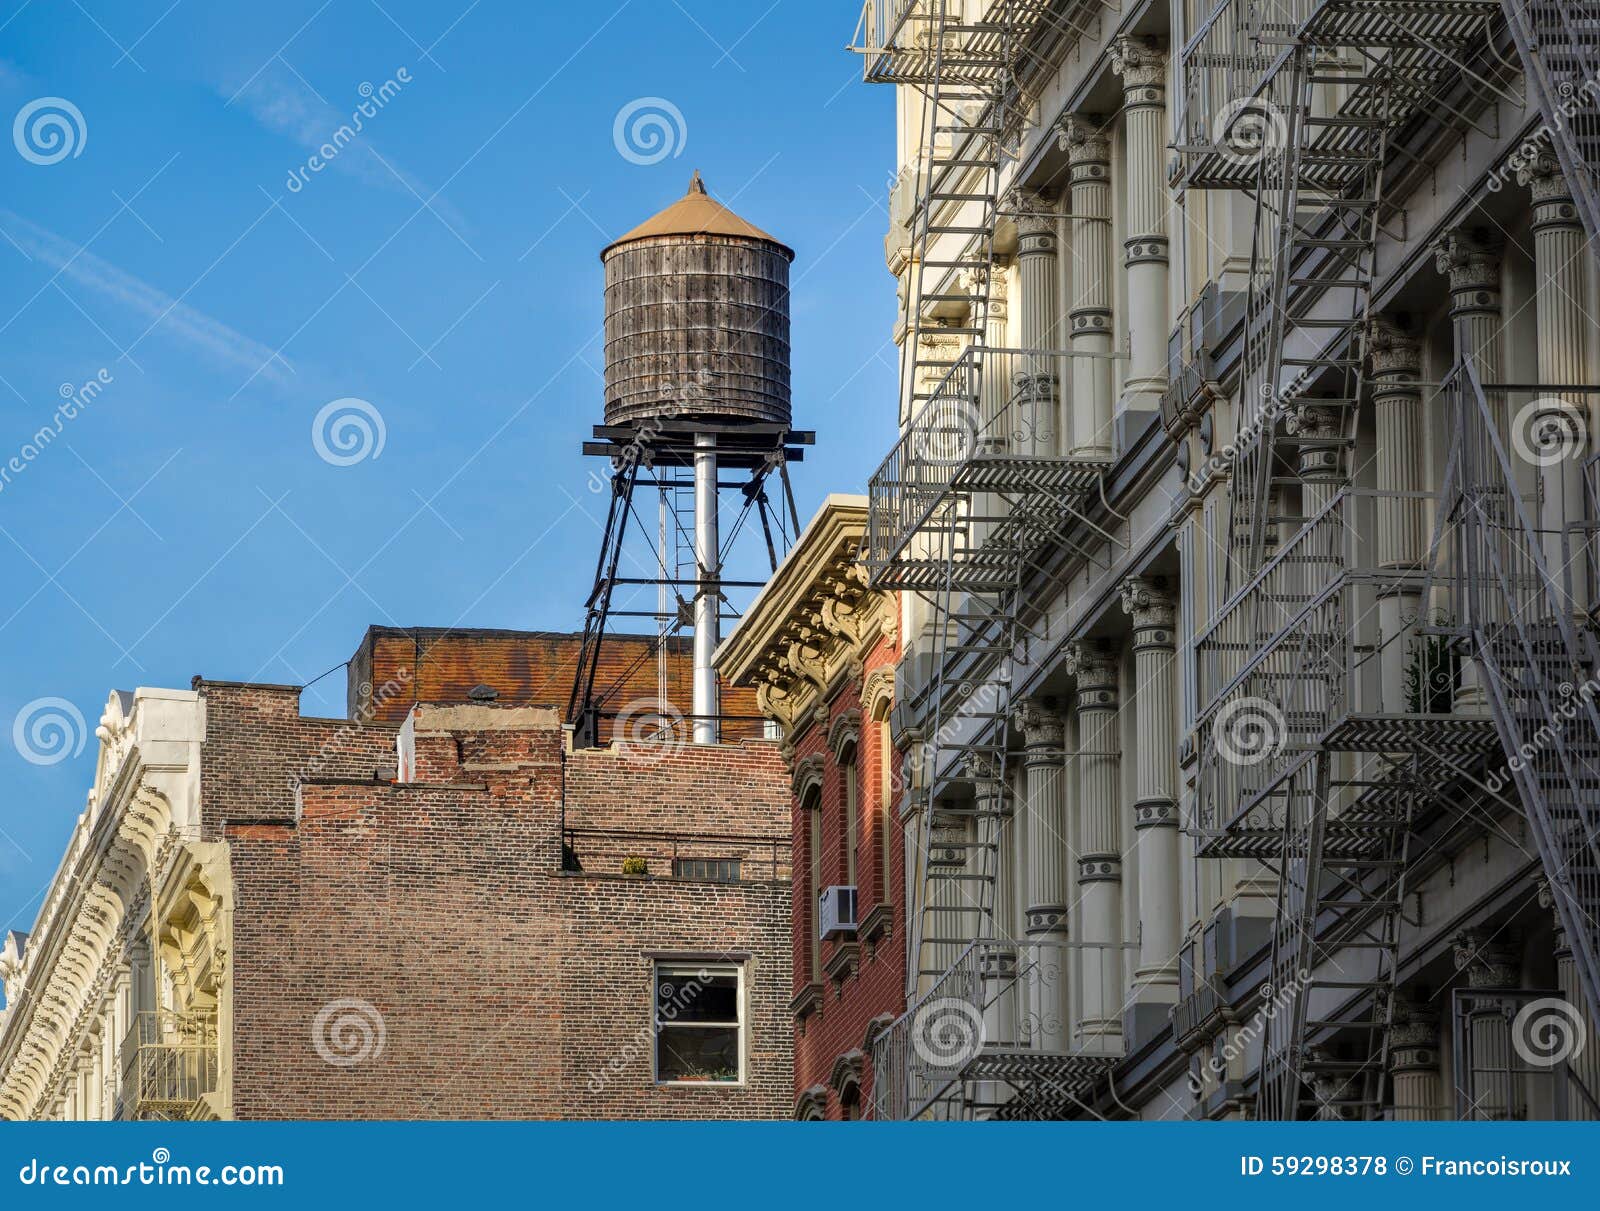 wooden water tank and cast iron facades, soho, new york